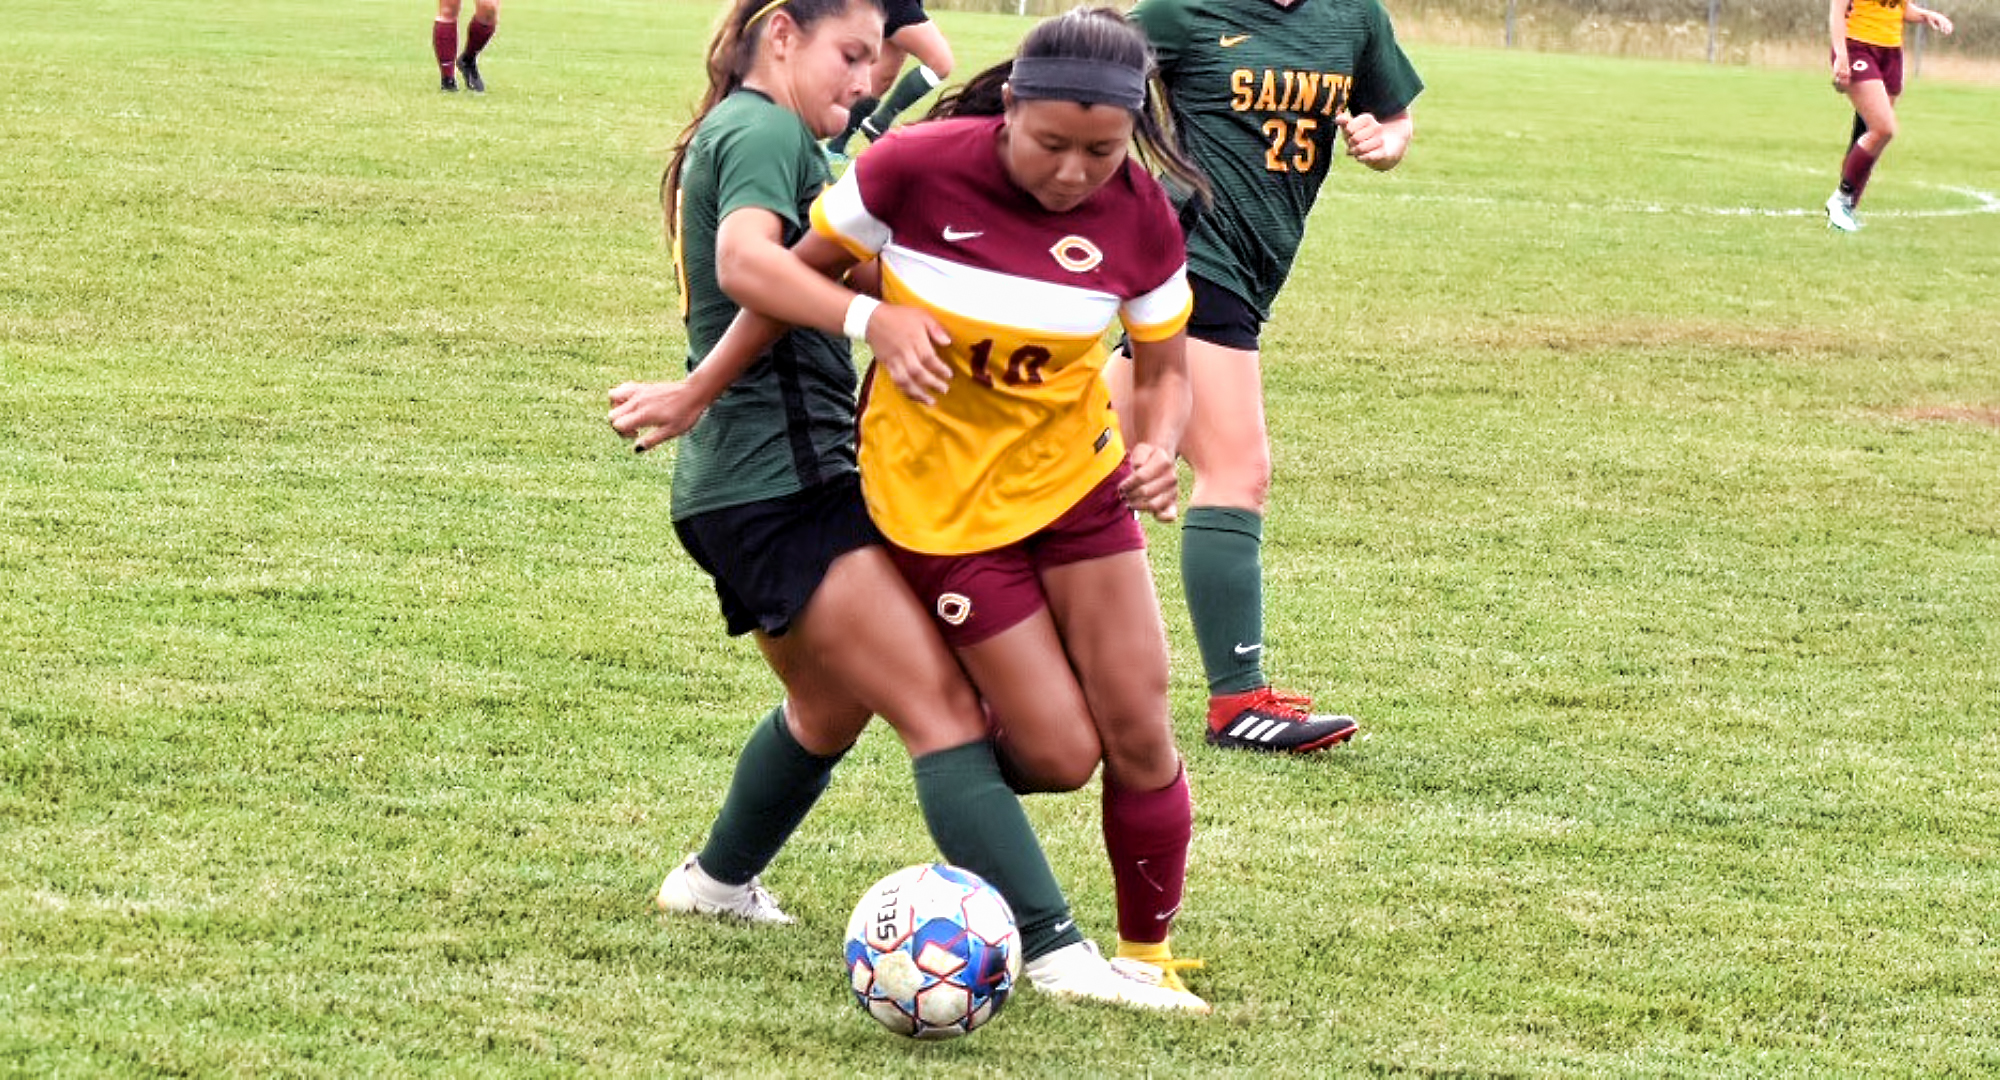 Sophomore Kay Franzese takes control of the ball against a Presentation defender. She scored the game-winning goal which was her first collegiate strike. (Photo courtesy of Vince Arnold)